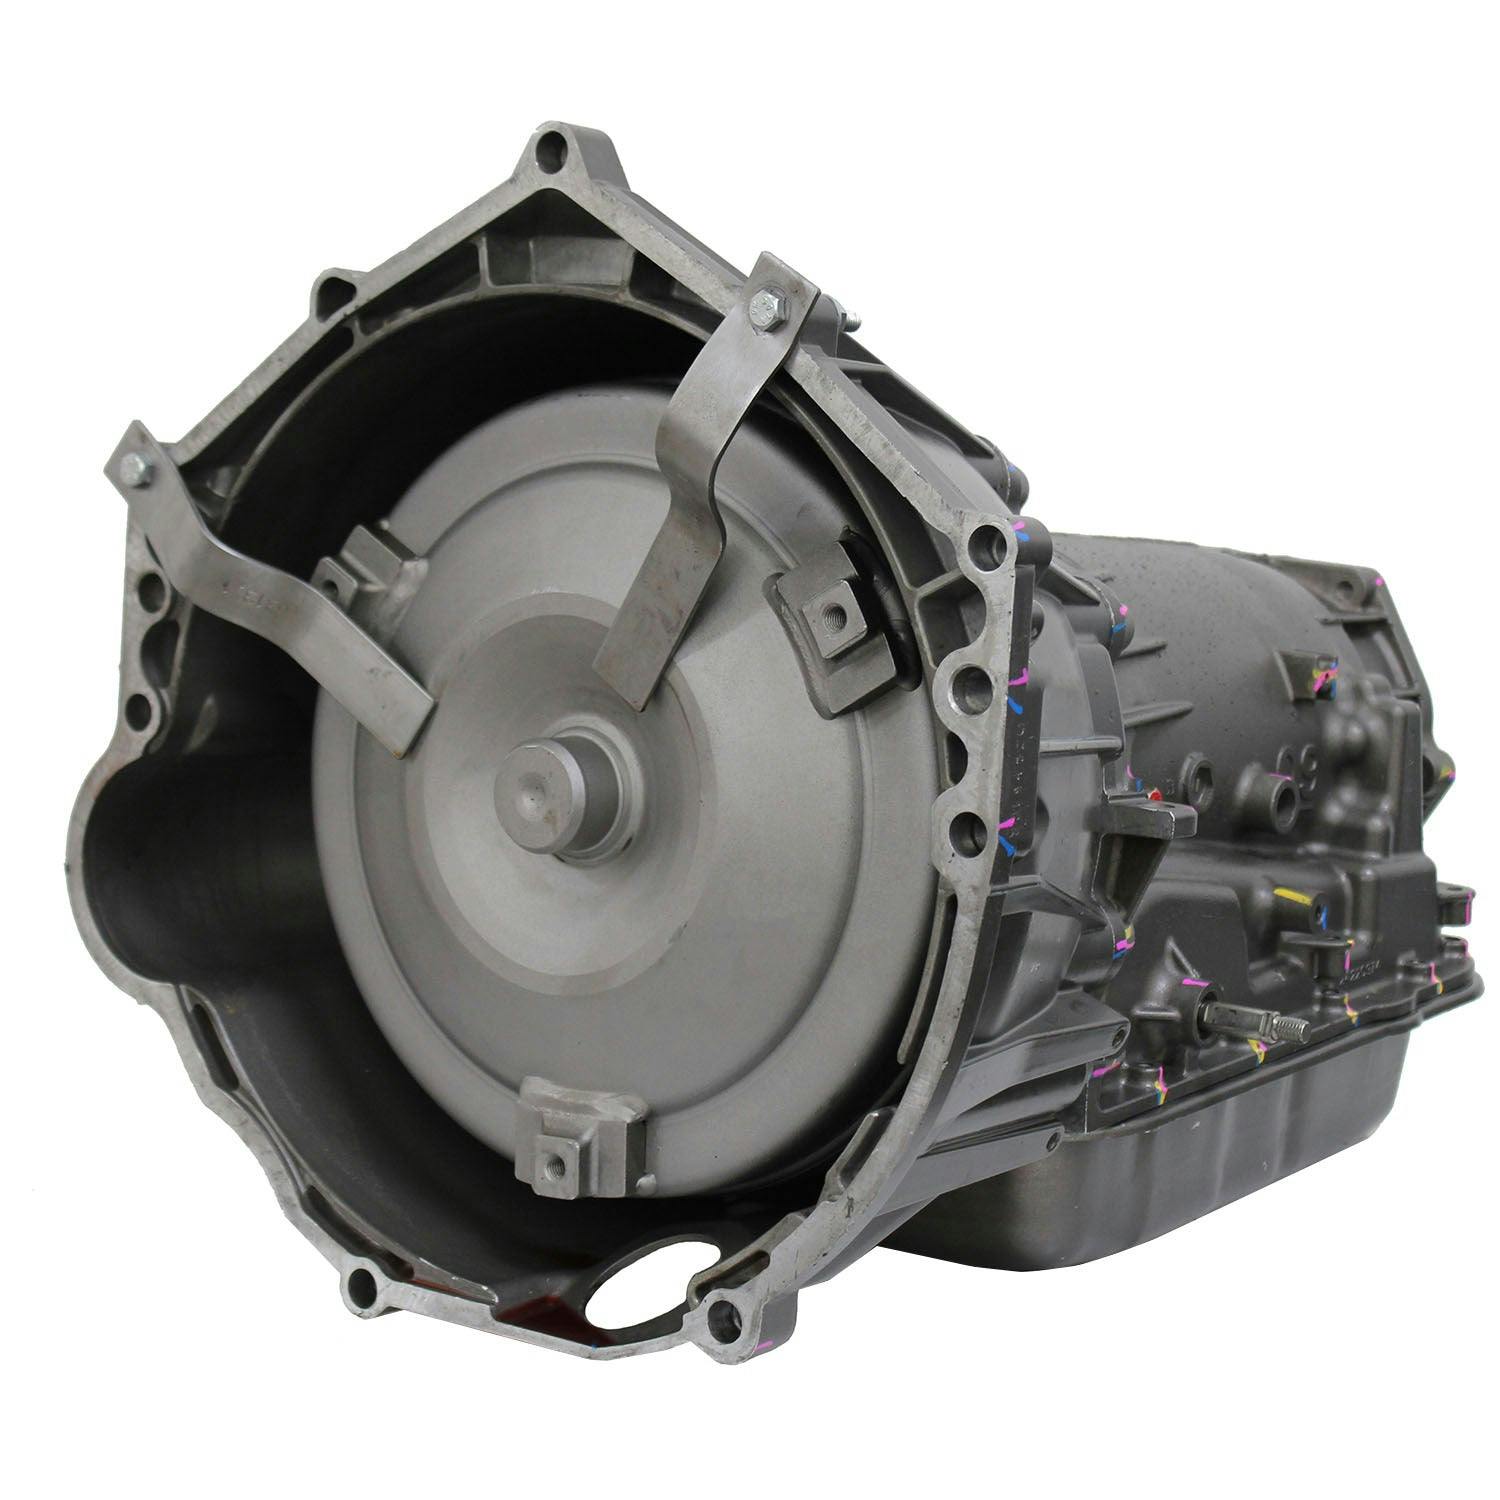 Automatic Transmission for 2009-2012 Chevrolet Colorado/GMC Canyon/Hummer H3, H3T 4WD with 5.3L V8 Engine